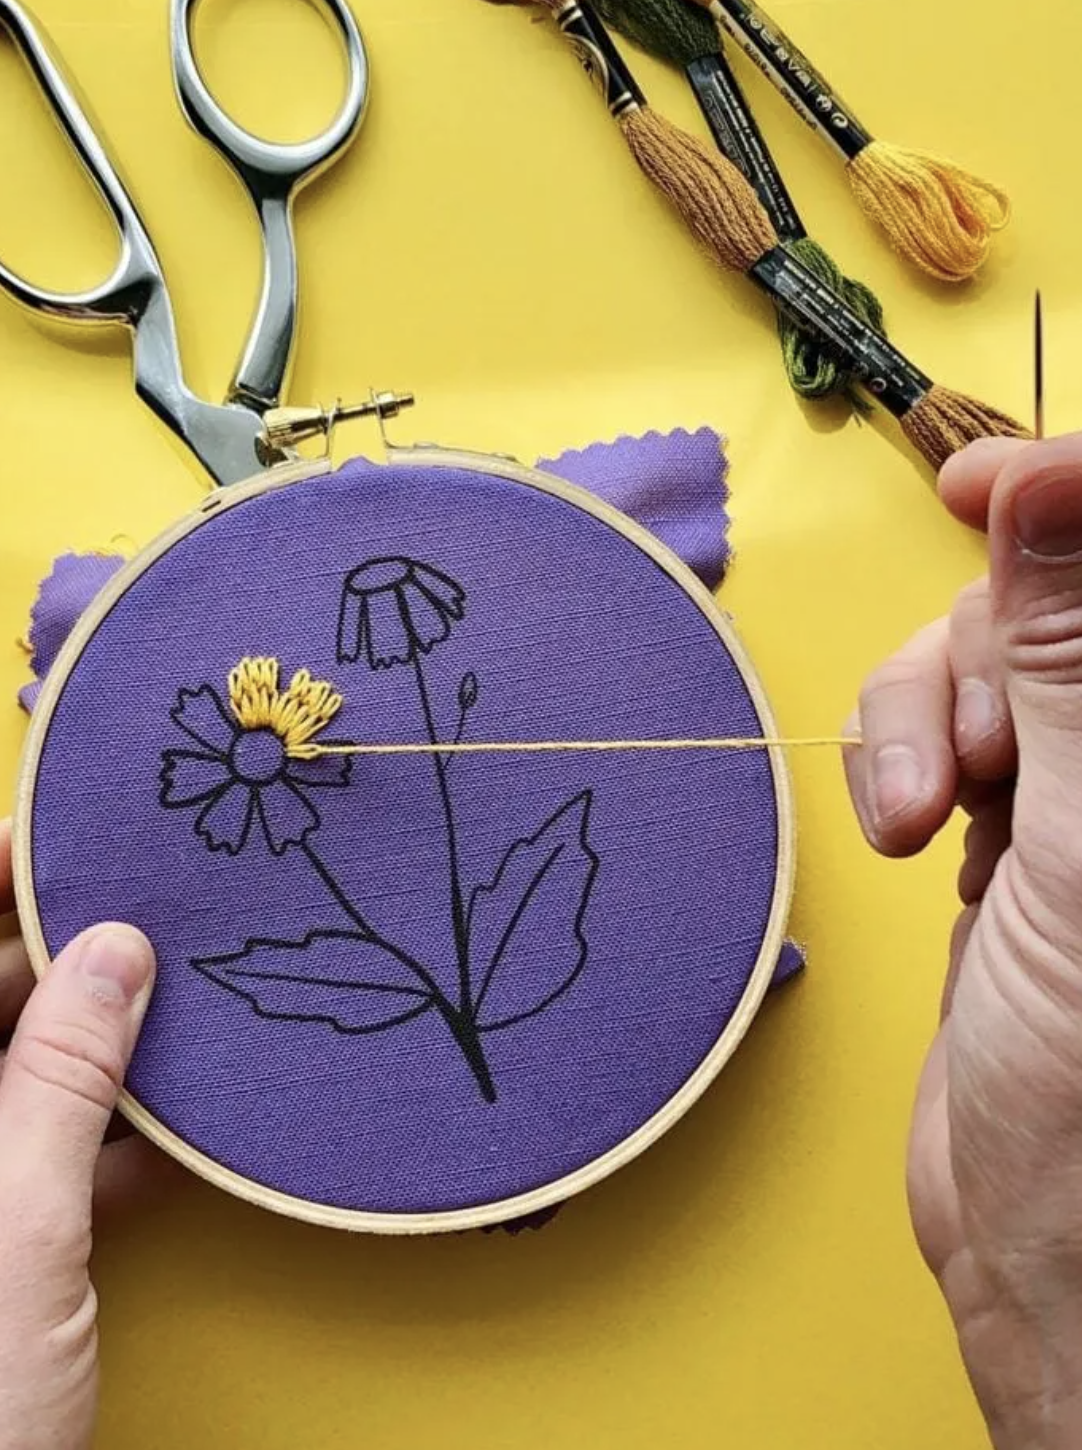 Two hands holding a purple embroidery circle, stitching a yellow flower onto it; only two petals are done. The background is yellow and has scissors and brushes laying behind the piece.